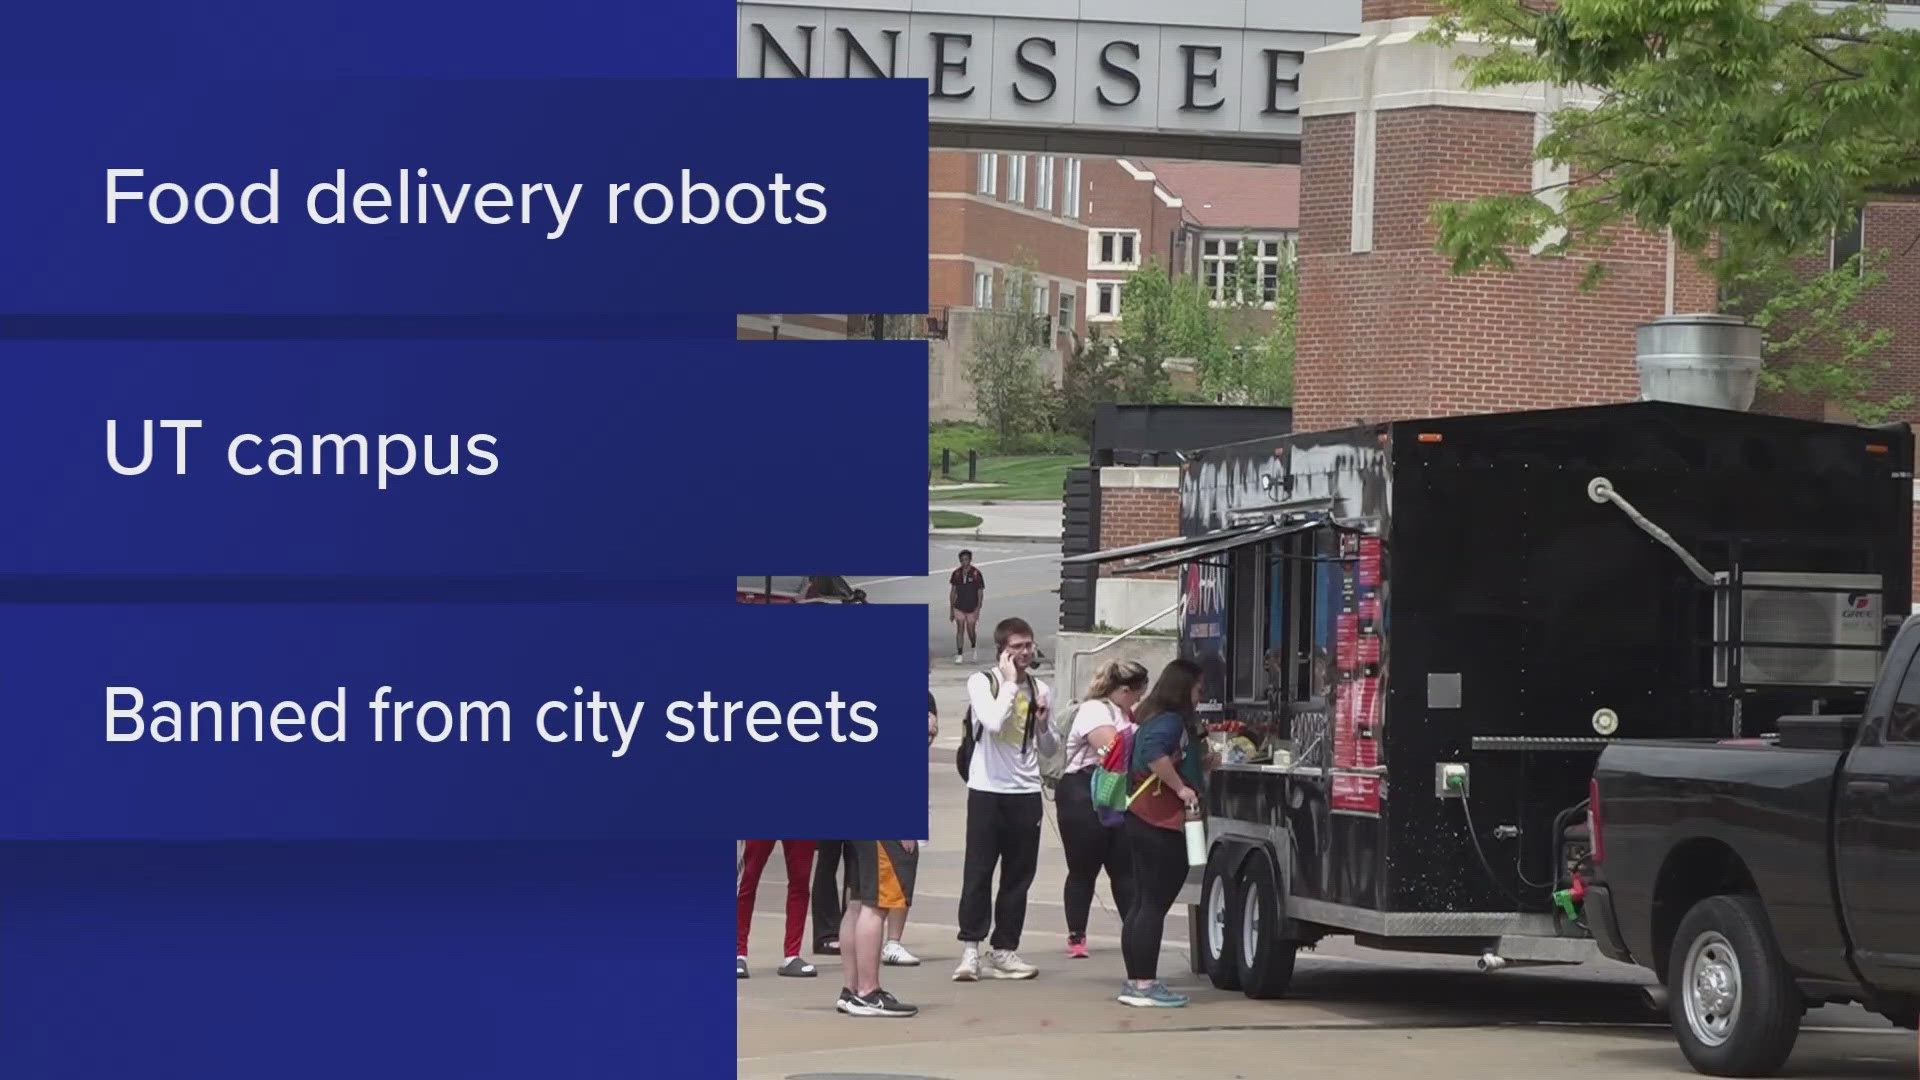 the city voted against having the robotic service in town.